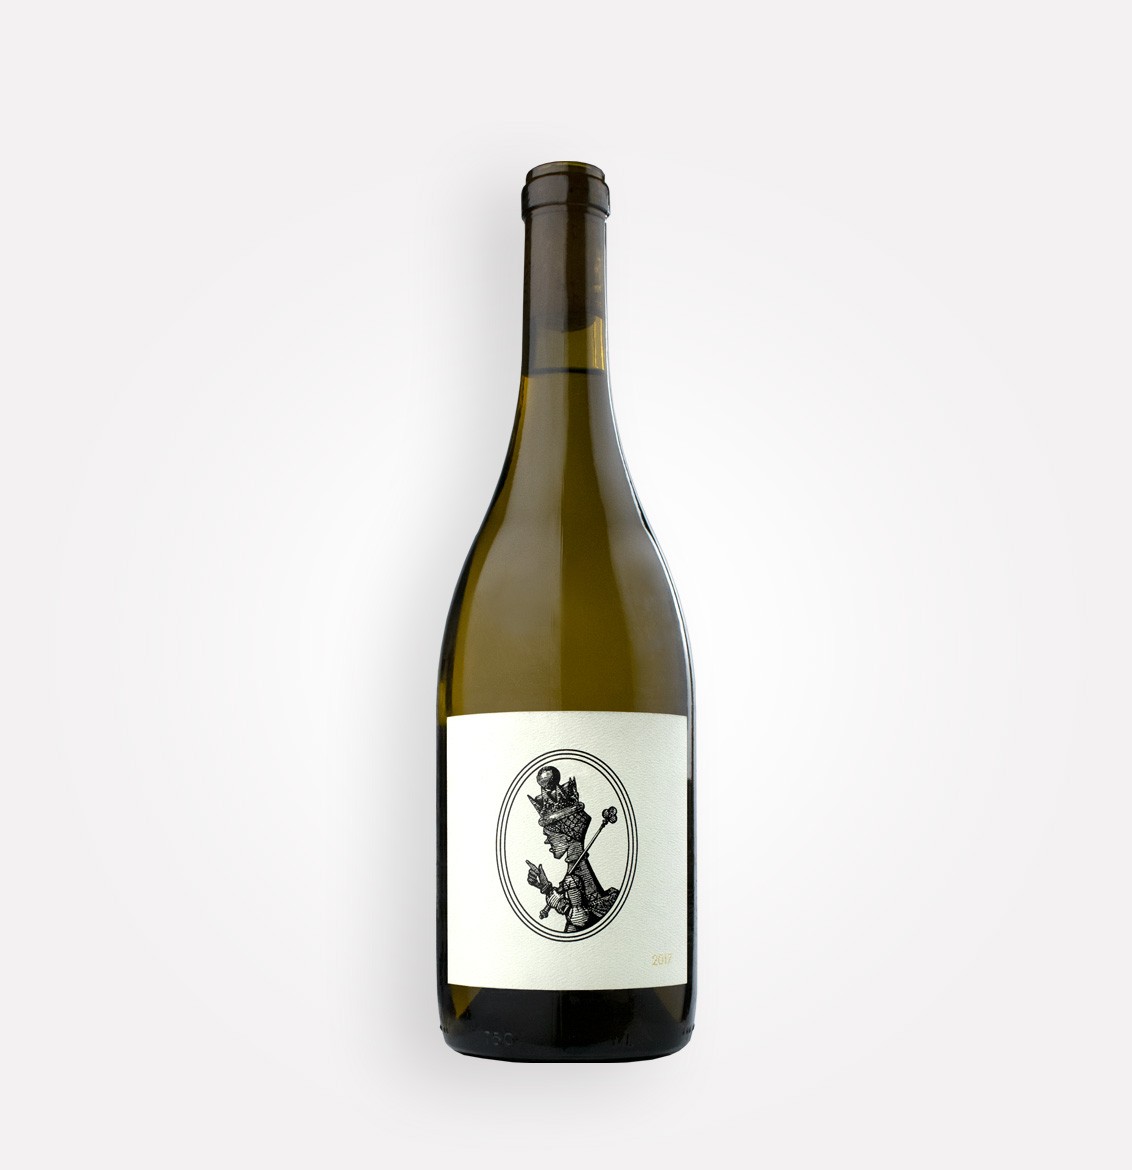 Bottle of The Wonderland Project 2017 White Queen Chardonnay wine from California’s Sonoma County